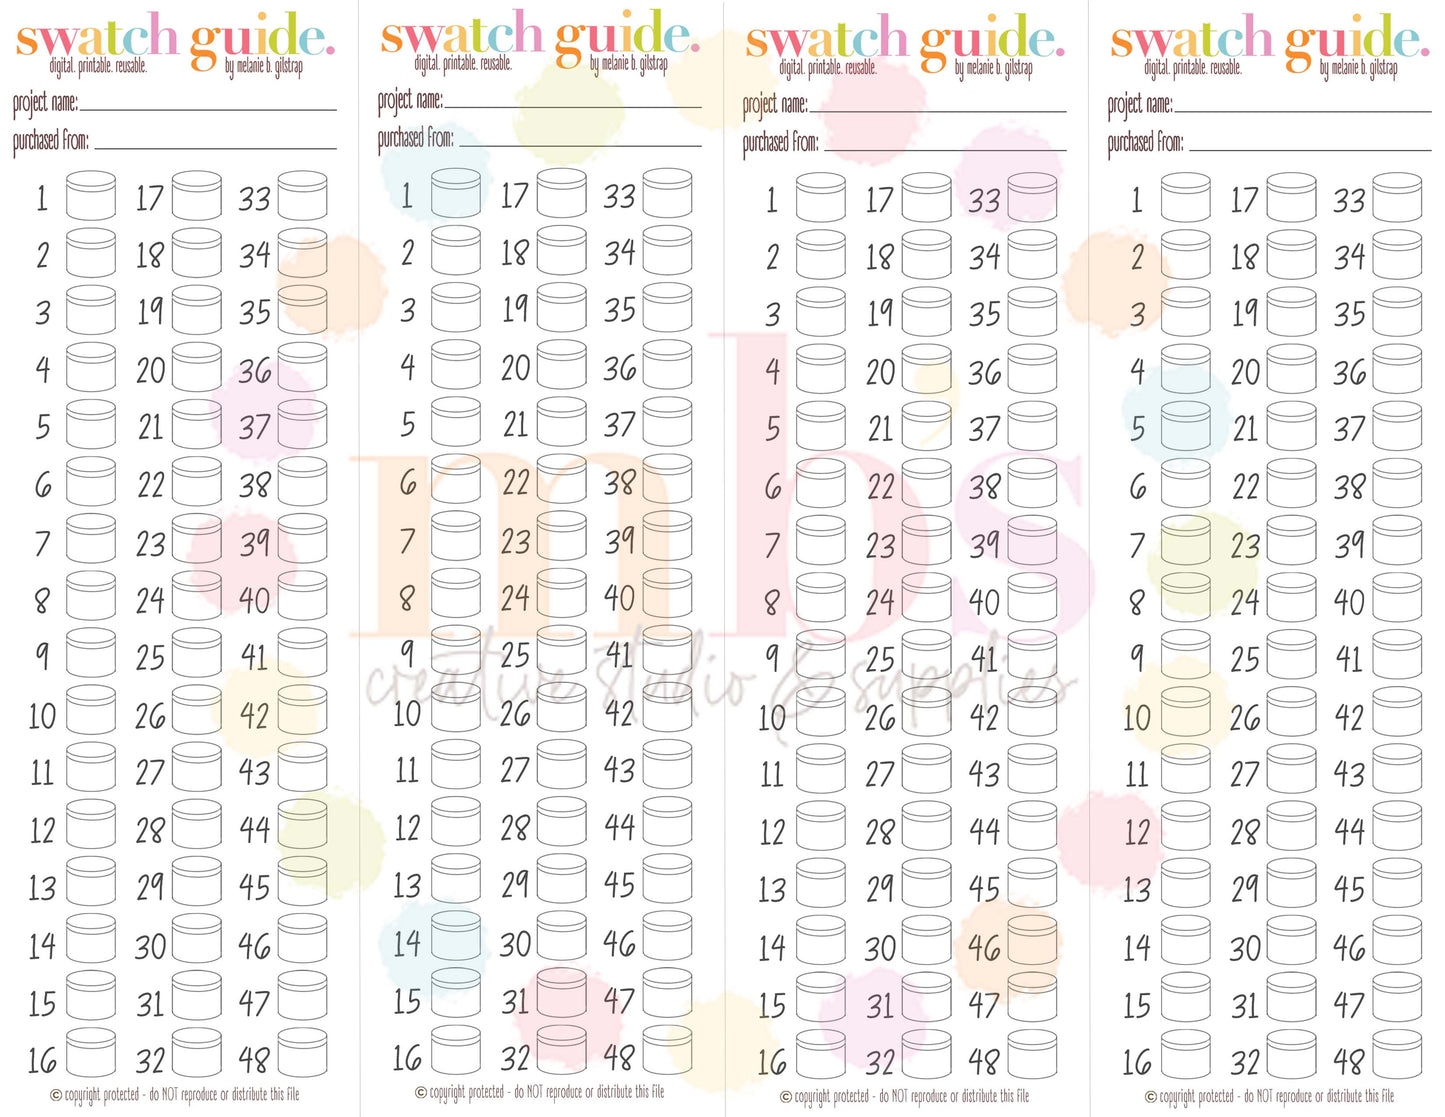 MB's Digital Downloadable & Printable Guide for PBN: SWATCH GUIDE for 48 PAINTS